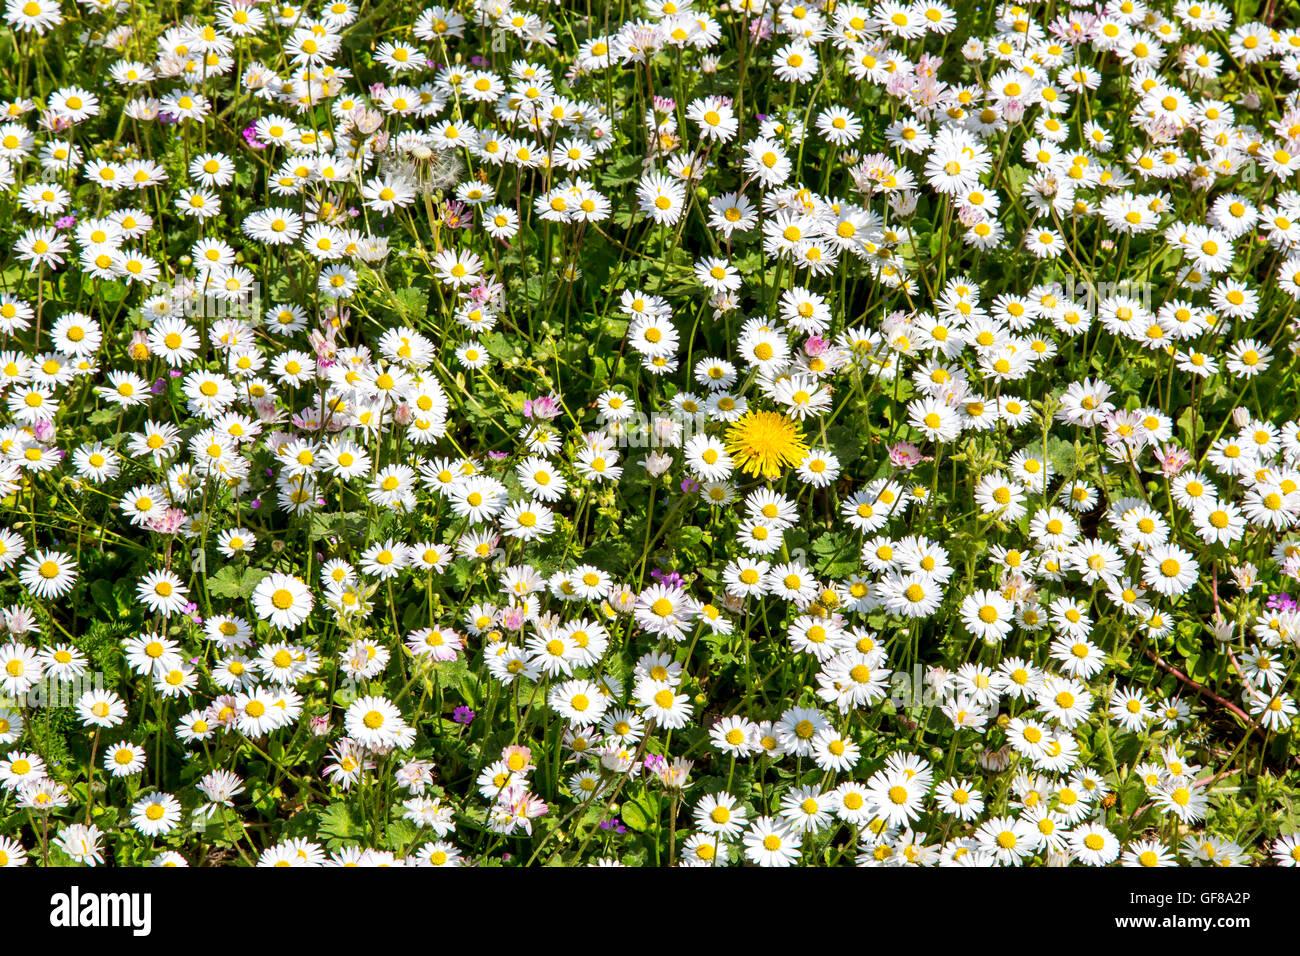 Daisies in a meadow, Bellis perennis, Stock Photo